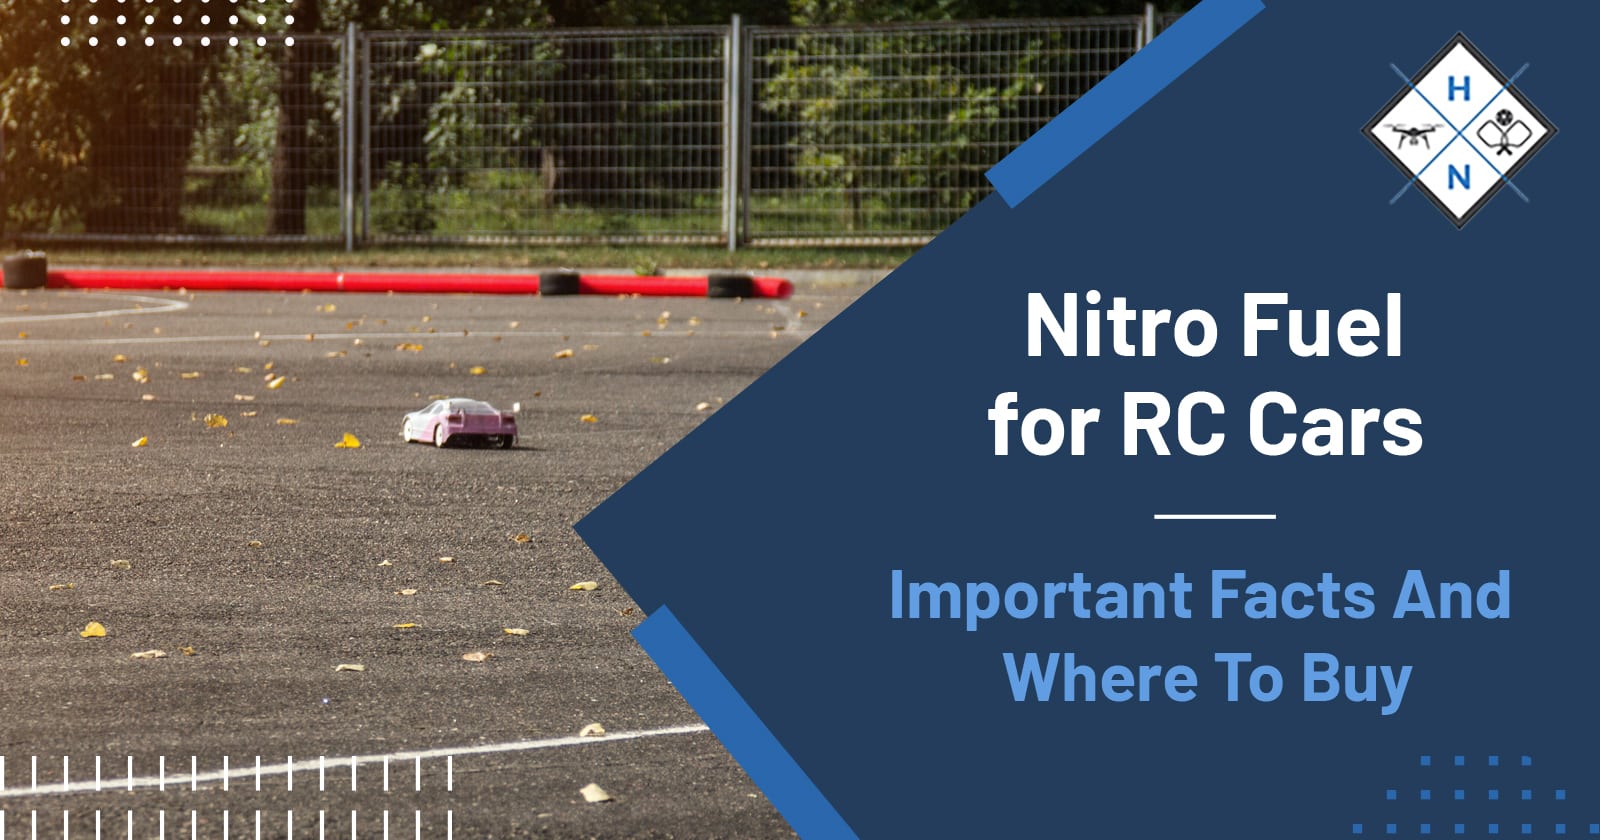 Nitro Fuel For RC Cars: Important Facts And Where To Buy